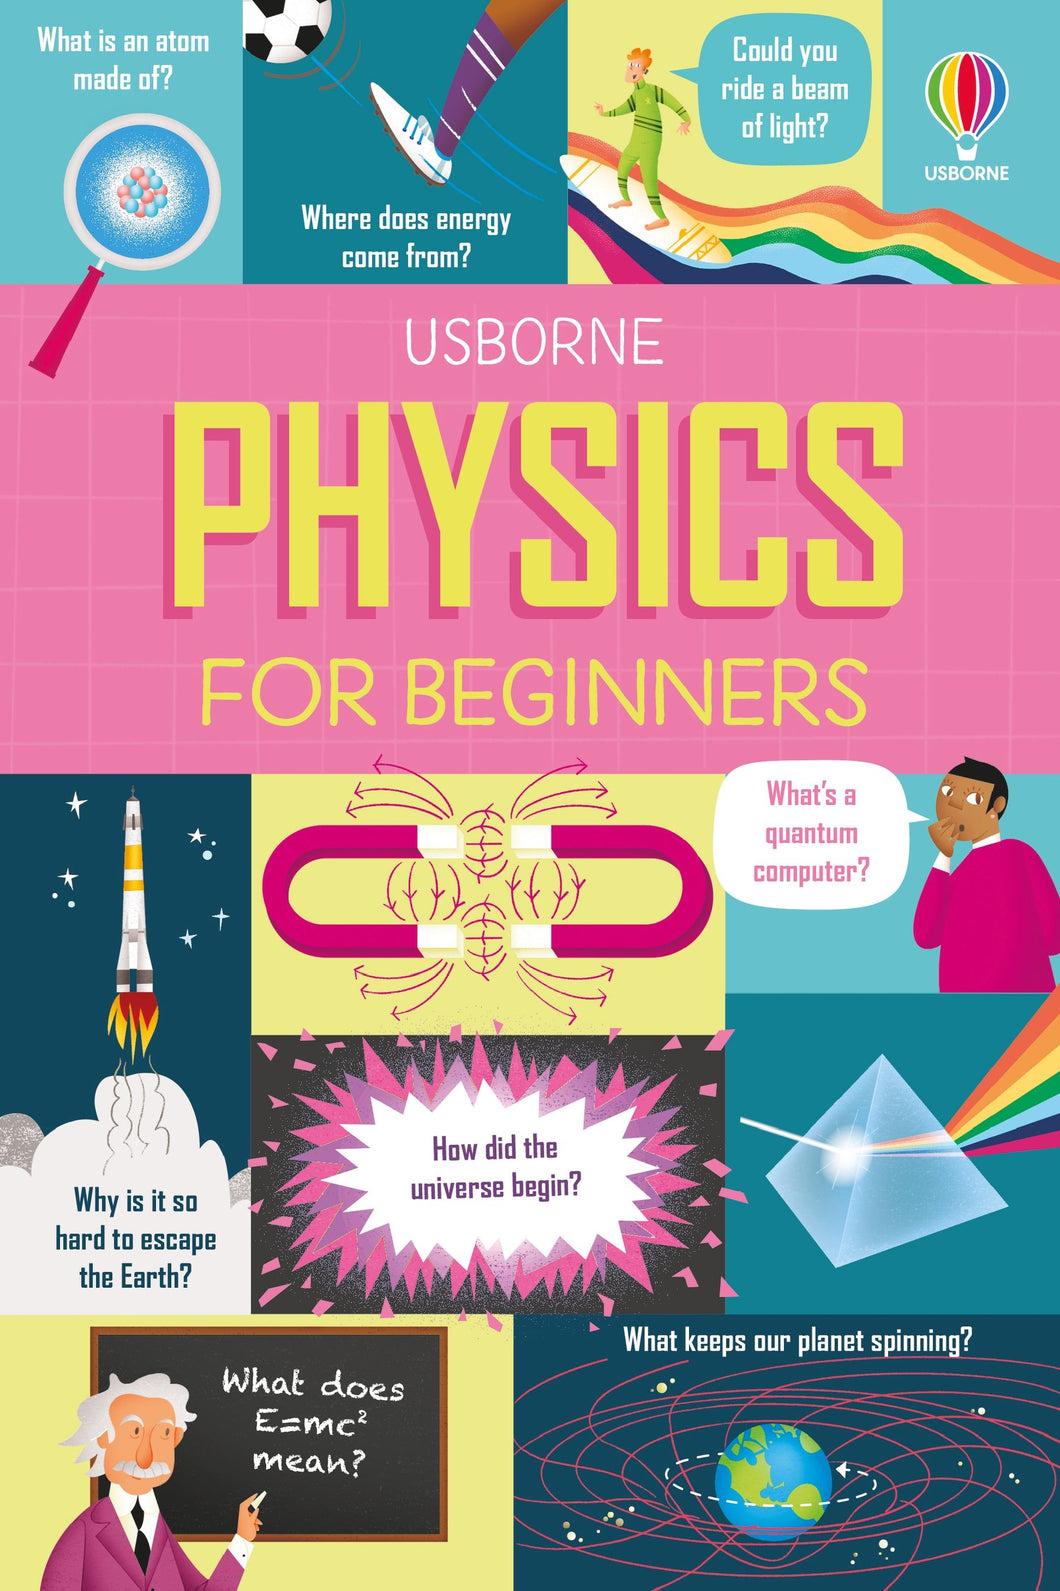 Book cover is blue, yellow and pink, and with different sections. Each section shows different illustration and question. Questions include 'what is an atom made of, where does energy come from, could you ride a beam of light, why is it so hard to escape the earth, what's a quantum computer, how did the universe begin, what keeps our planet spinning.